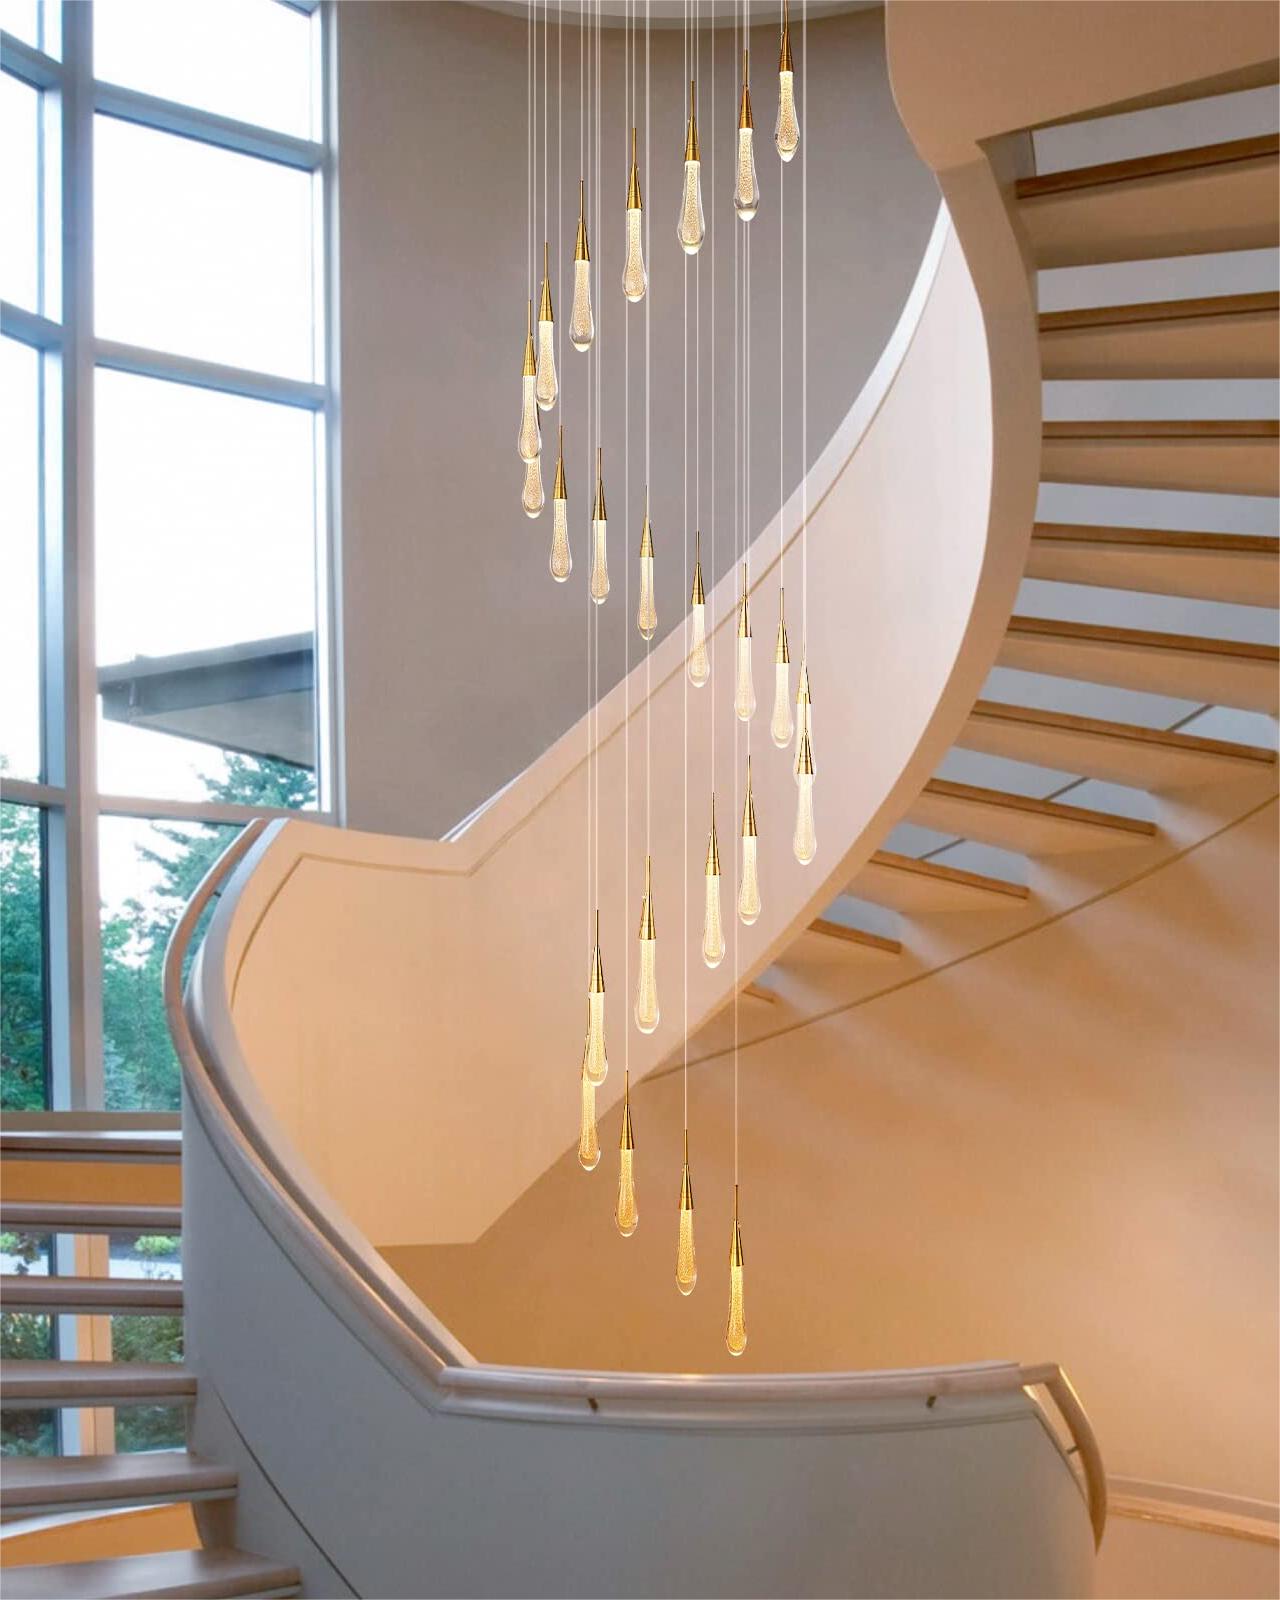 Illuminating staircases with timeless beauty